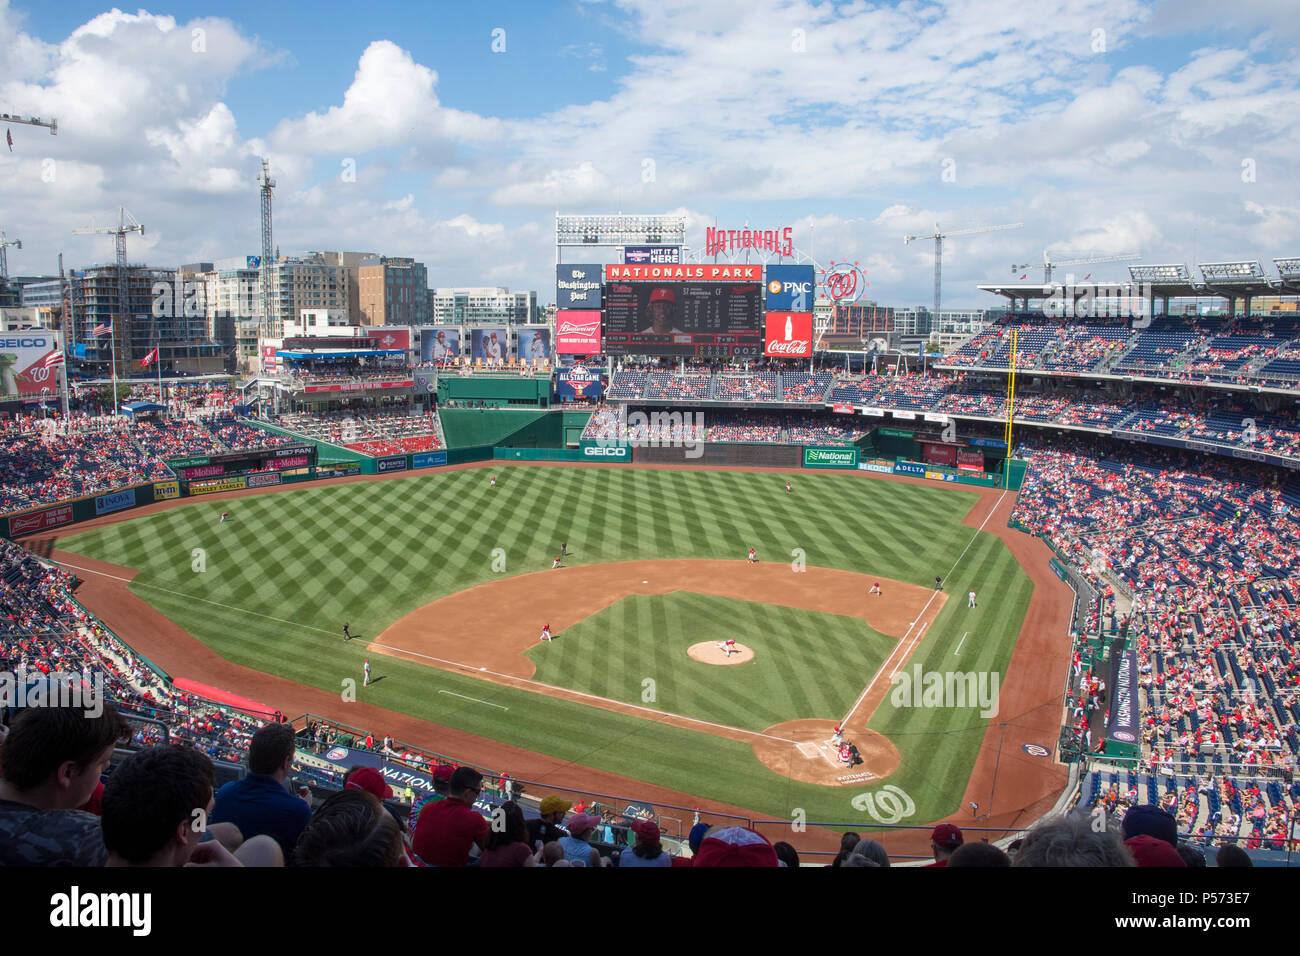 Wide view of Nationals Park on a sunny, cloudy summer day in Washington DC. Washington Nationals lost to the Philadlephia Phillies 5 - 3. Stock Photo